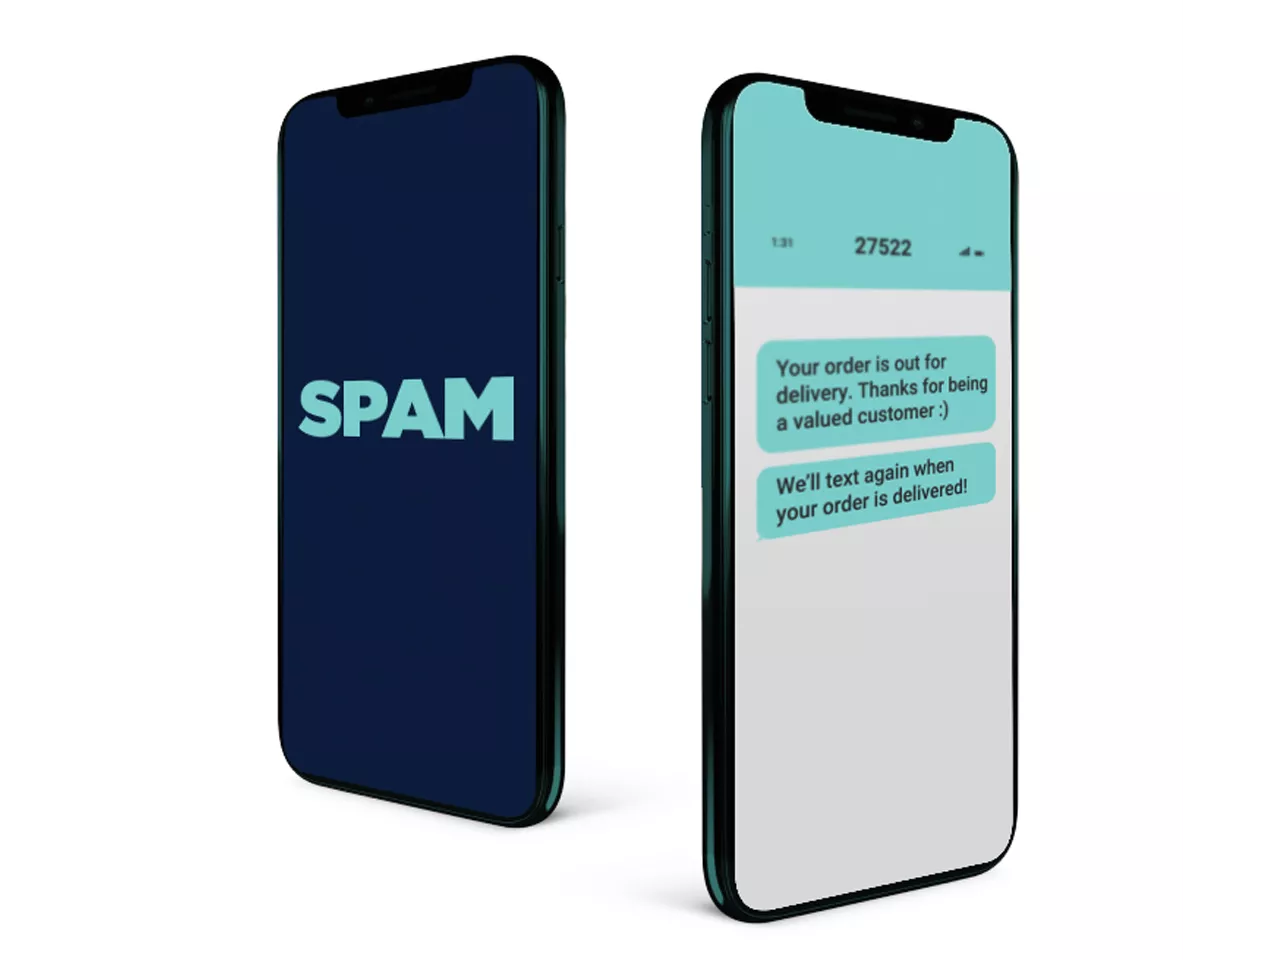 Illustration of two phones with spam content